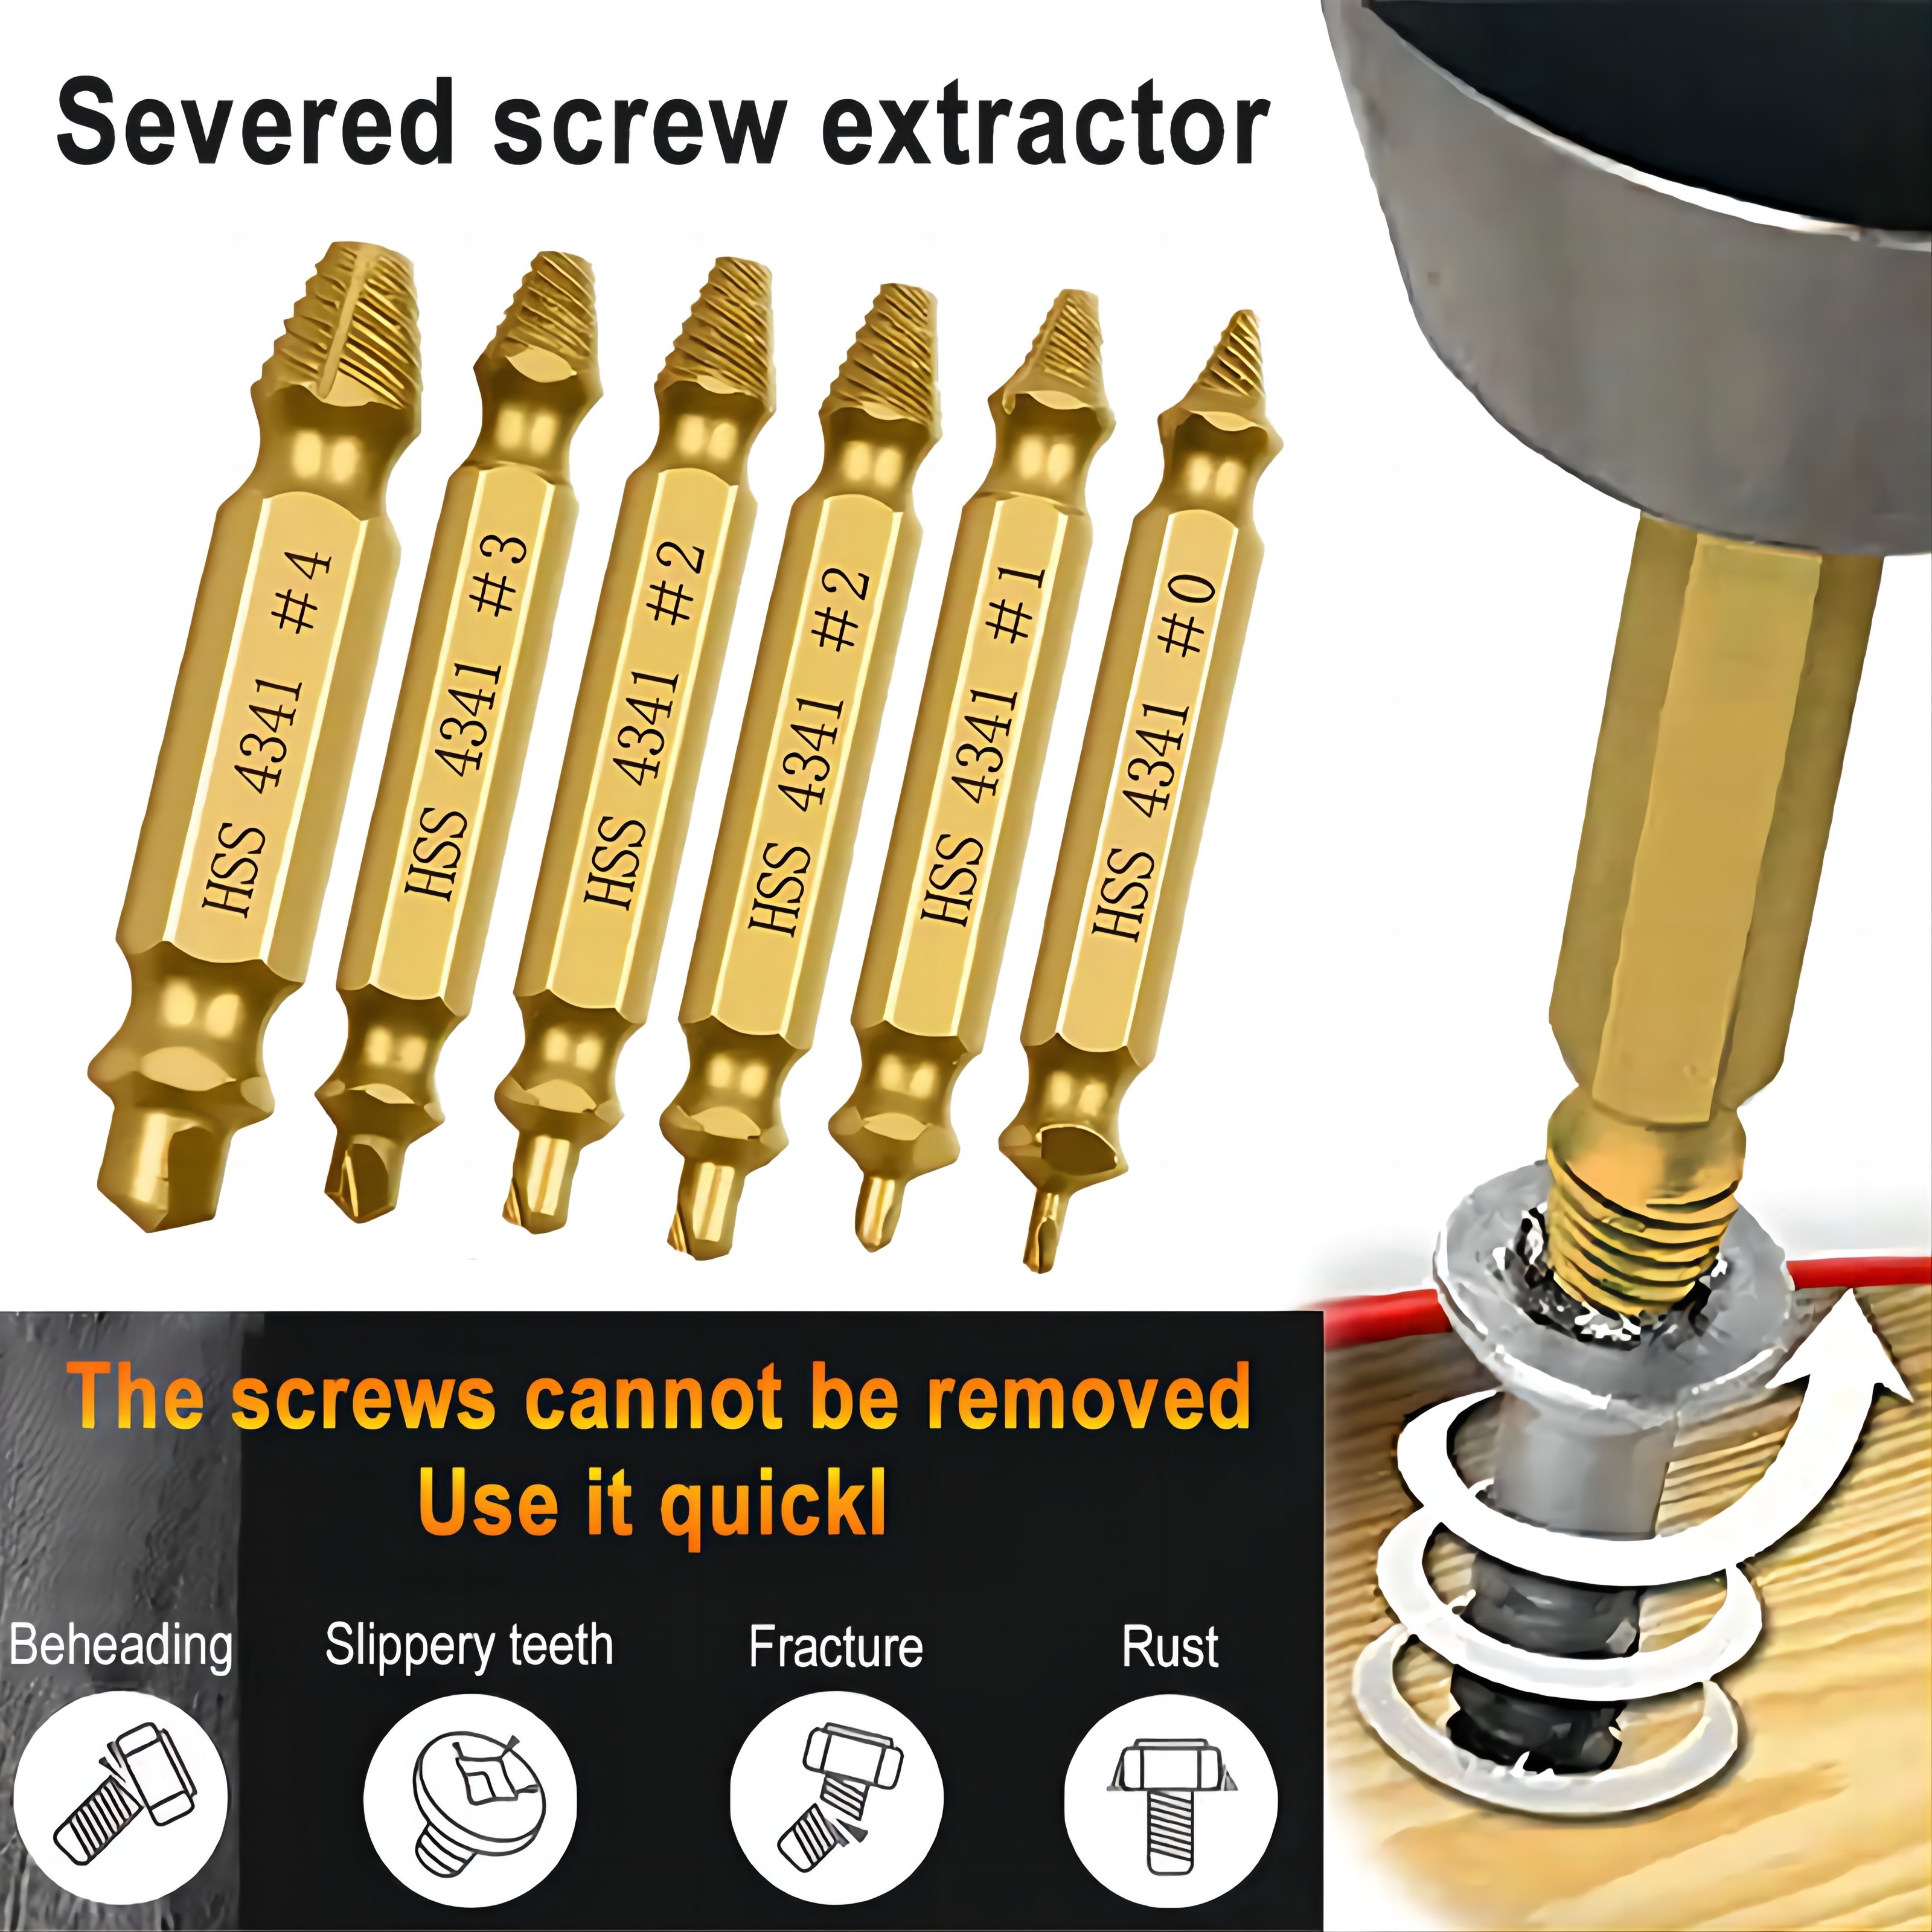 

6pcs Damaged Extractor Set: Double Head Remover Tools For Easy Out Bolt Extractor & Broken Head Removers - High Speed Steel